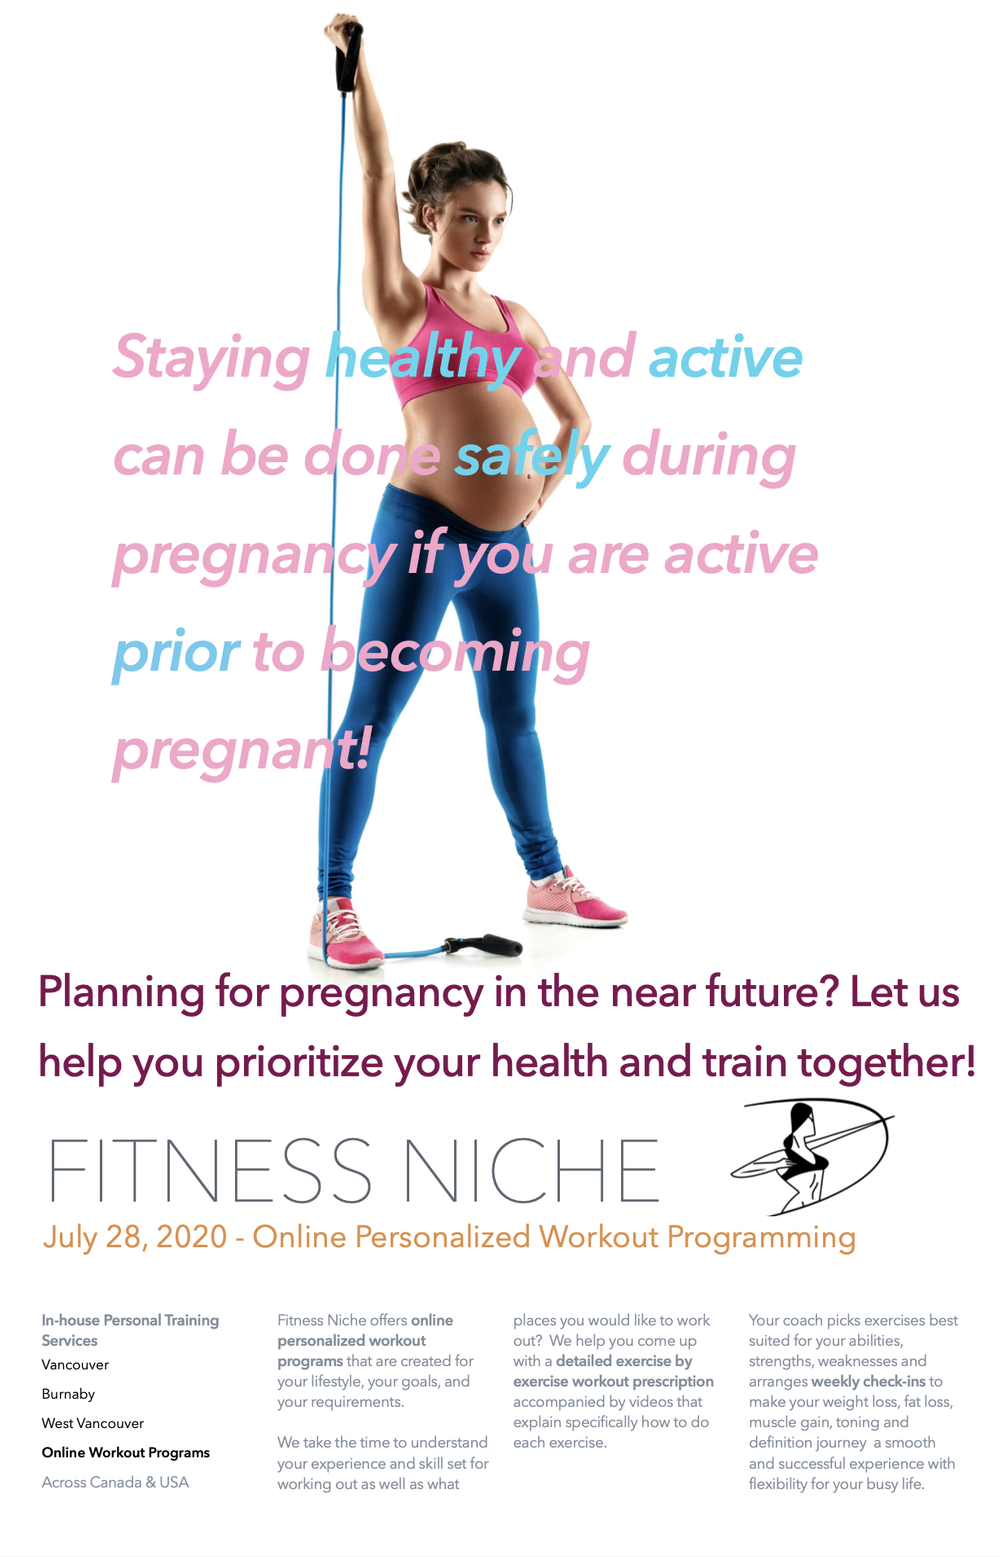 Blog by Fitness Niche